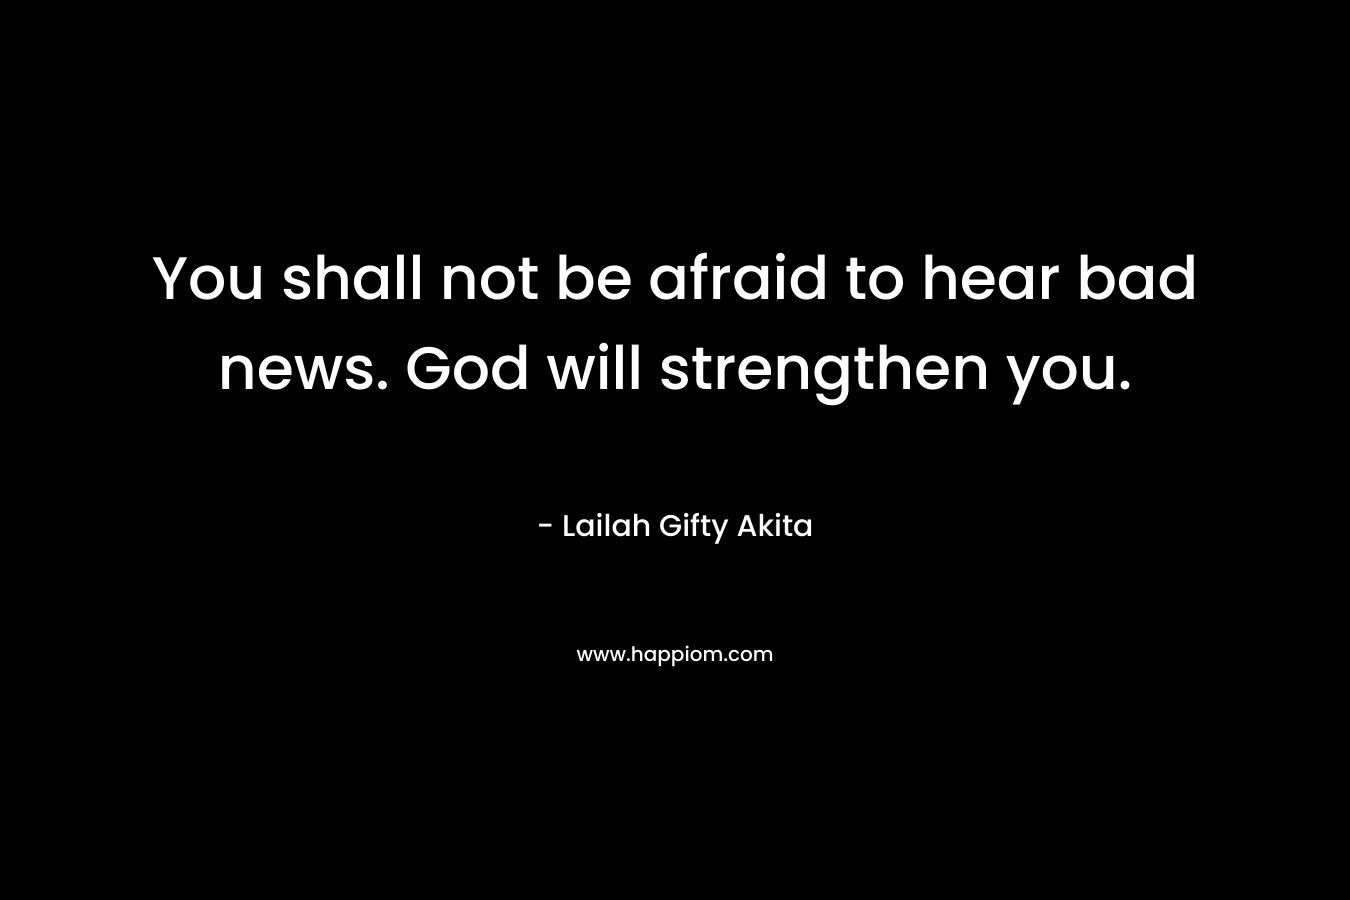 You shall not be afraid to hear bad news. God will strengthen you. – Lailah Gifty Akita